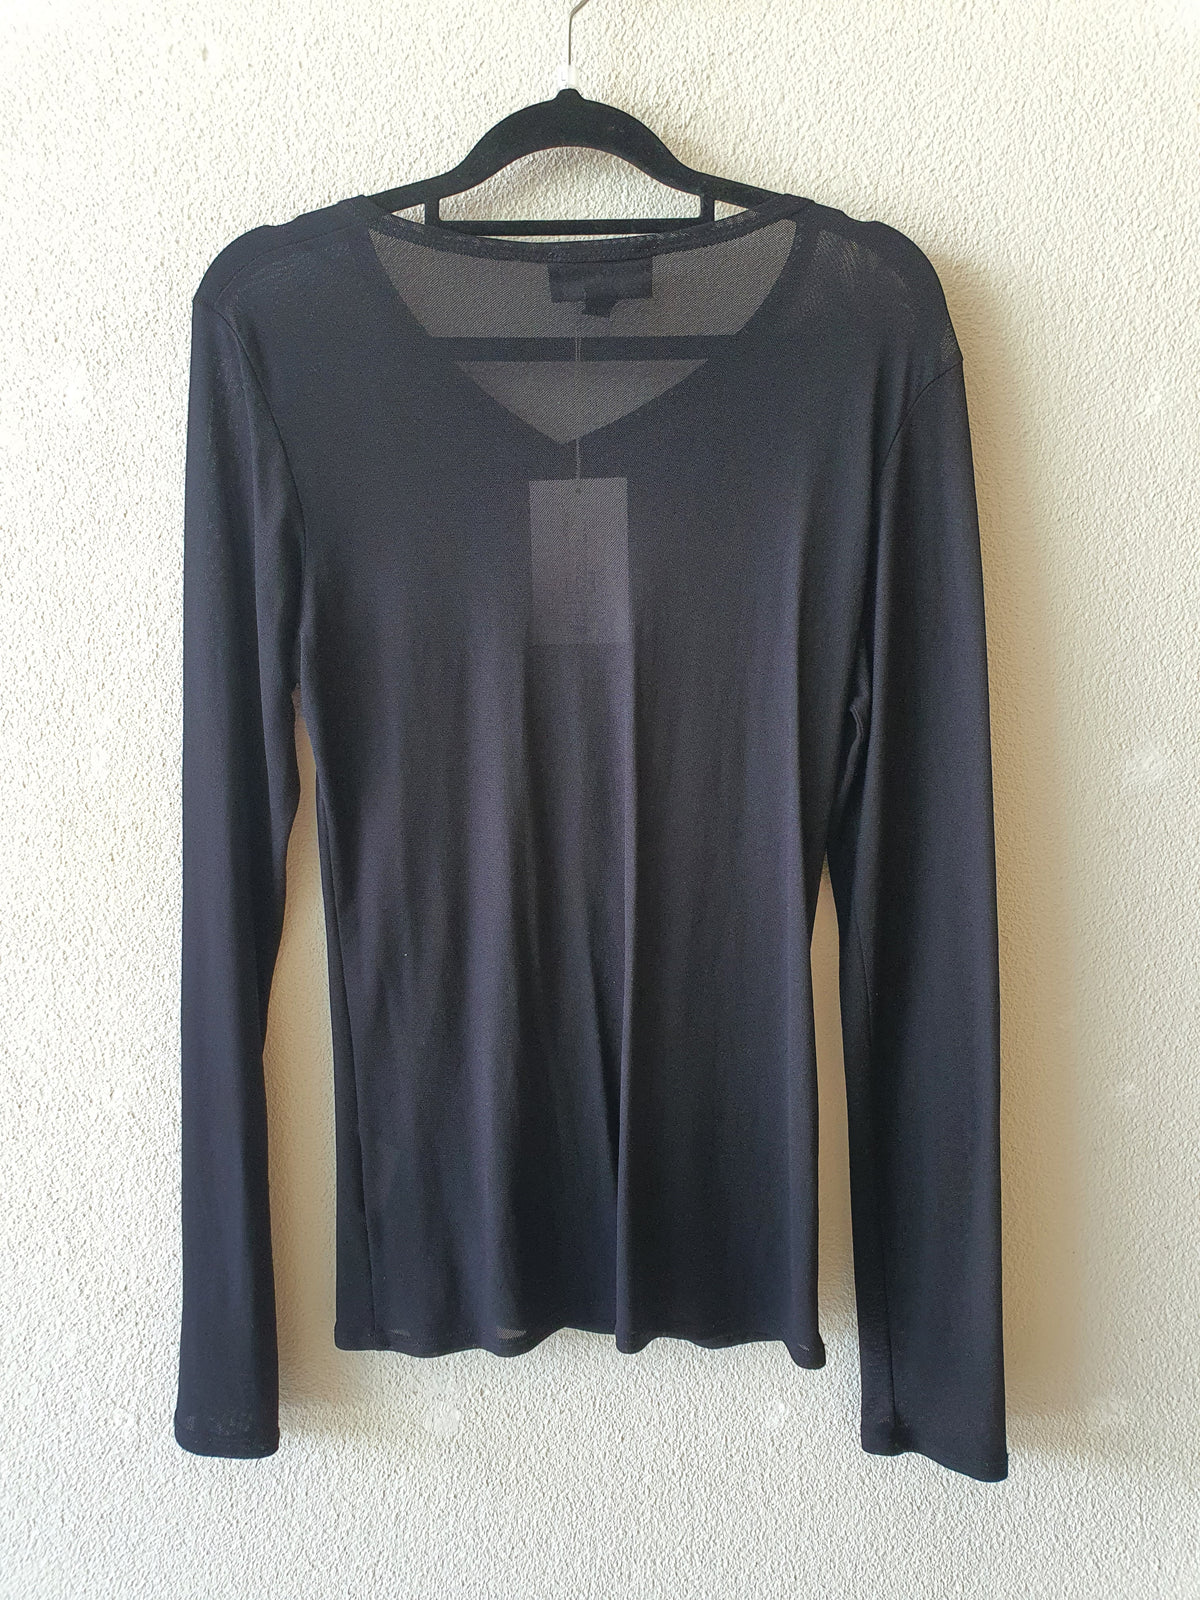 Suzanne Gregory Black sheer cross front M/L